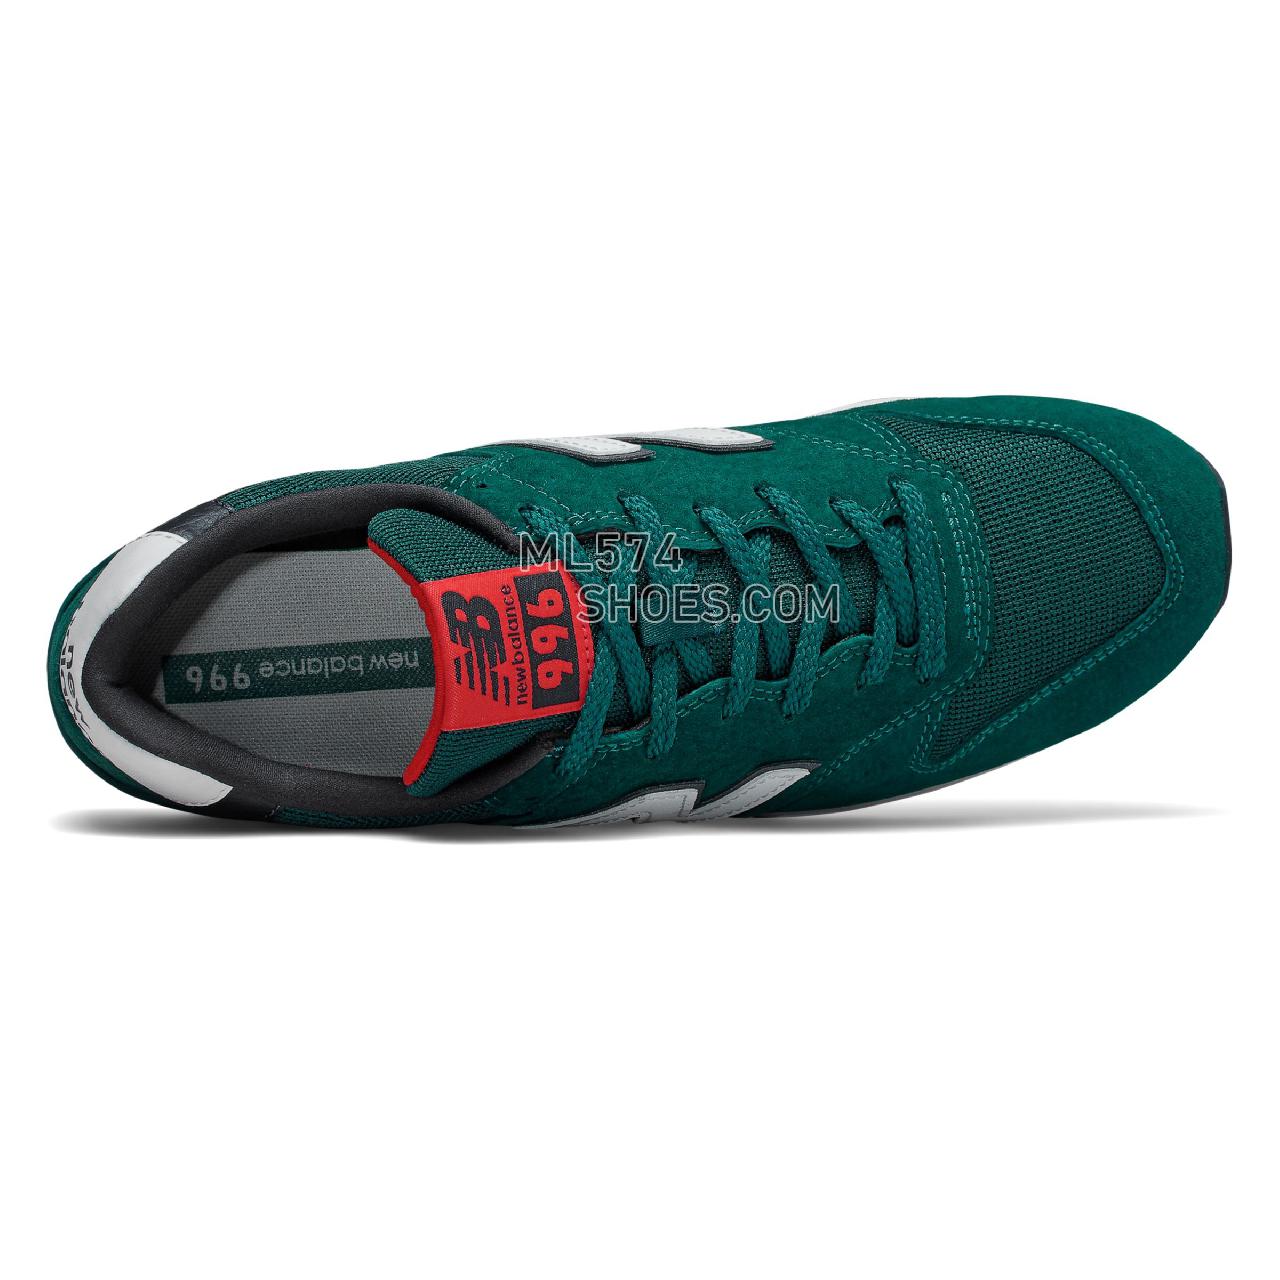 New Balance 996 - Men's 996 Classic CM996V2-27575-M - Tropical Green with Eclipse - CM996RB